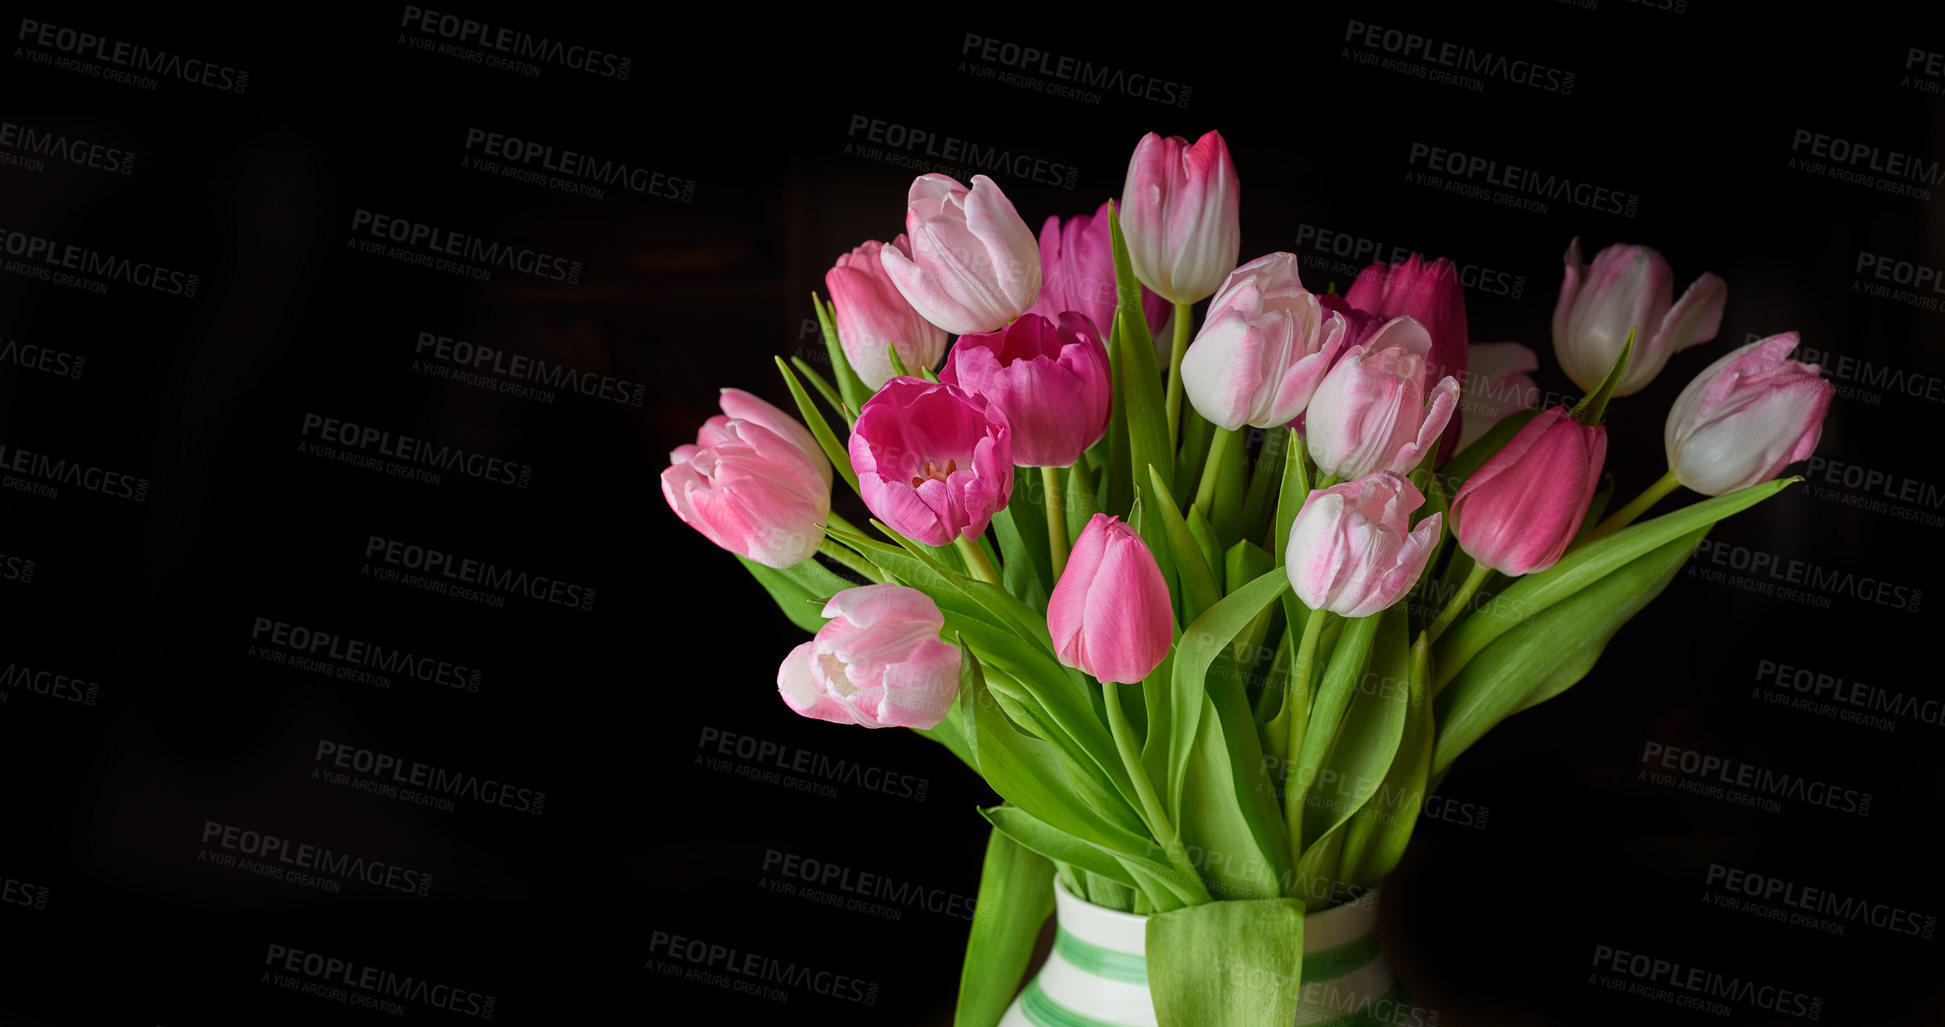 Buy stock photo Copy space of tulip flowers in a vase against a black background. Closeup of beautiful flowering plants with pink petals and green leaves blooming and blossoming. A gift bouquet for Valentine's Day